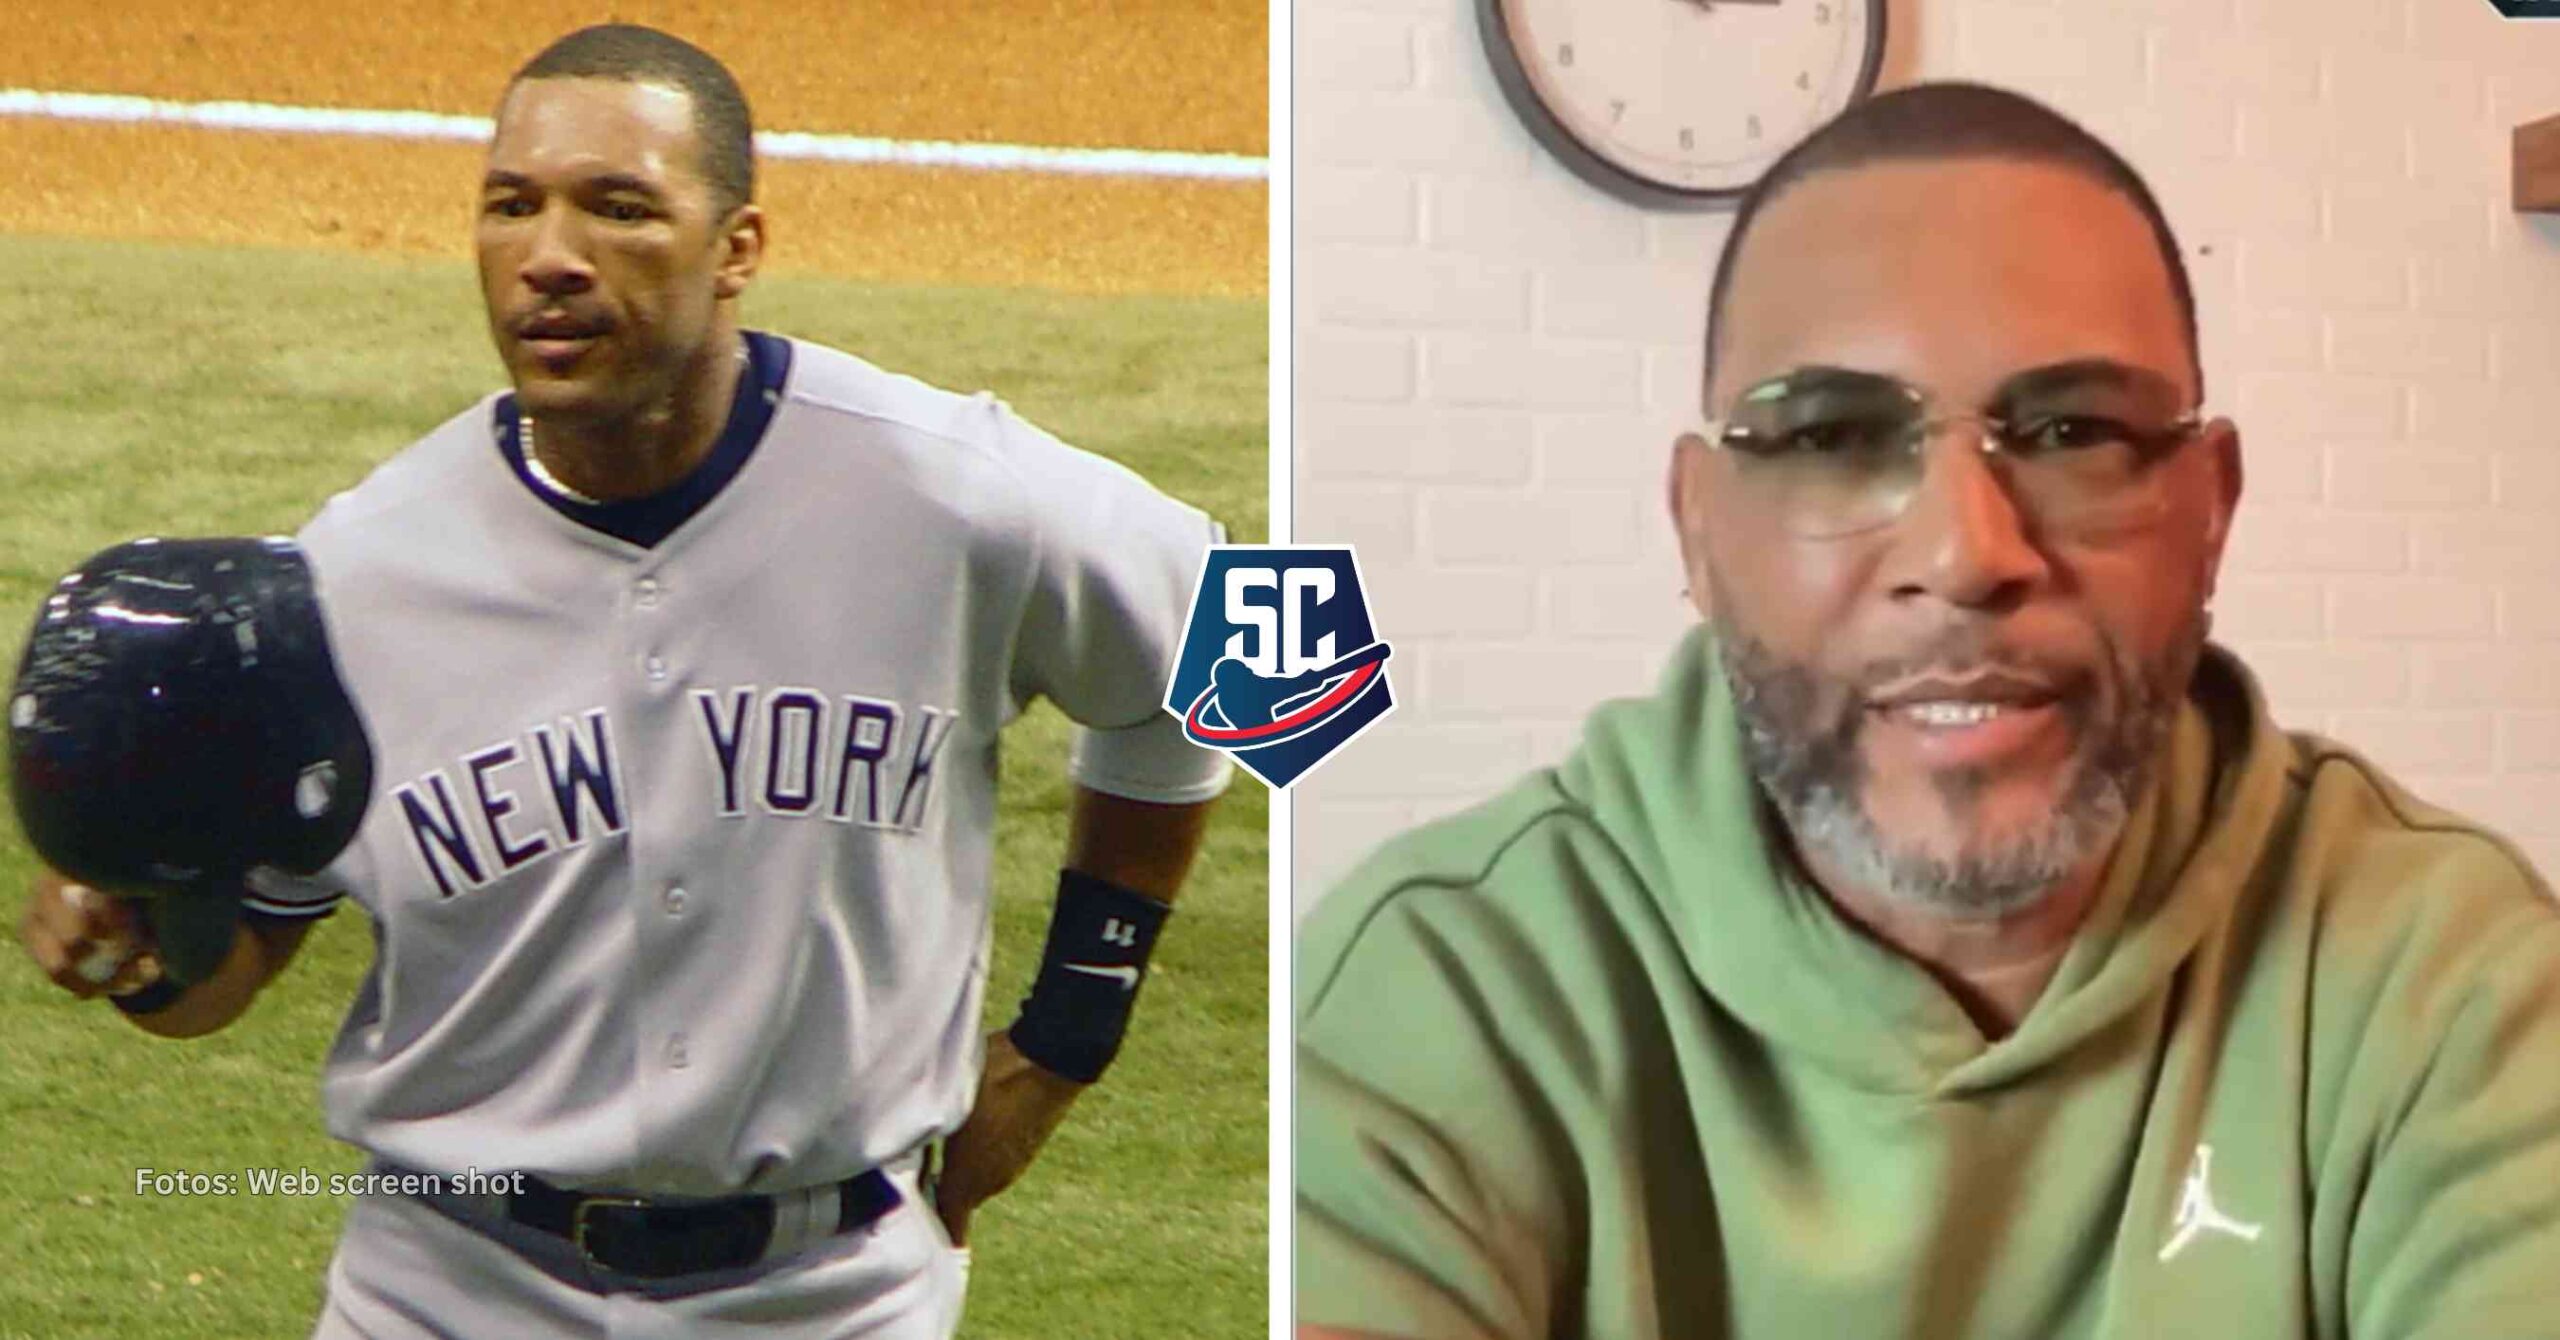 Former New York Yankees Gary Sheffield said in 2004 that “they got lucky.”